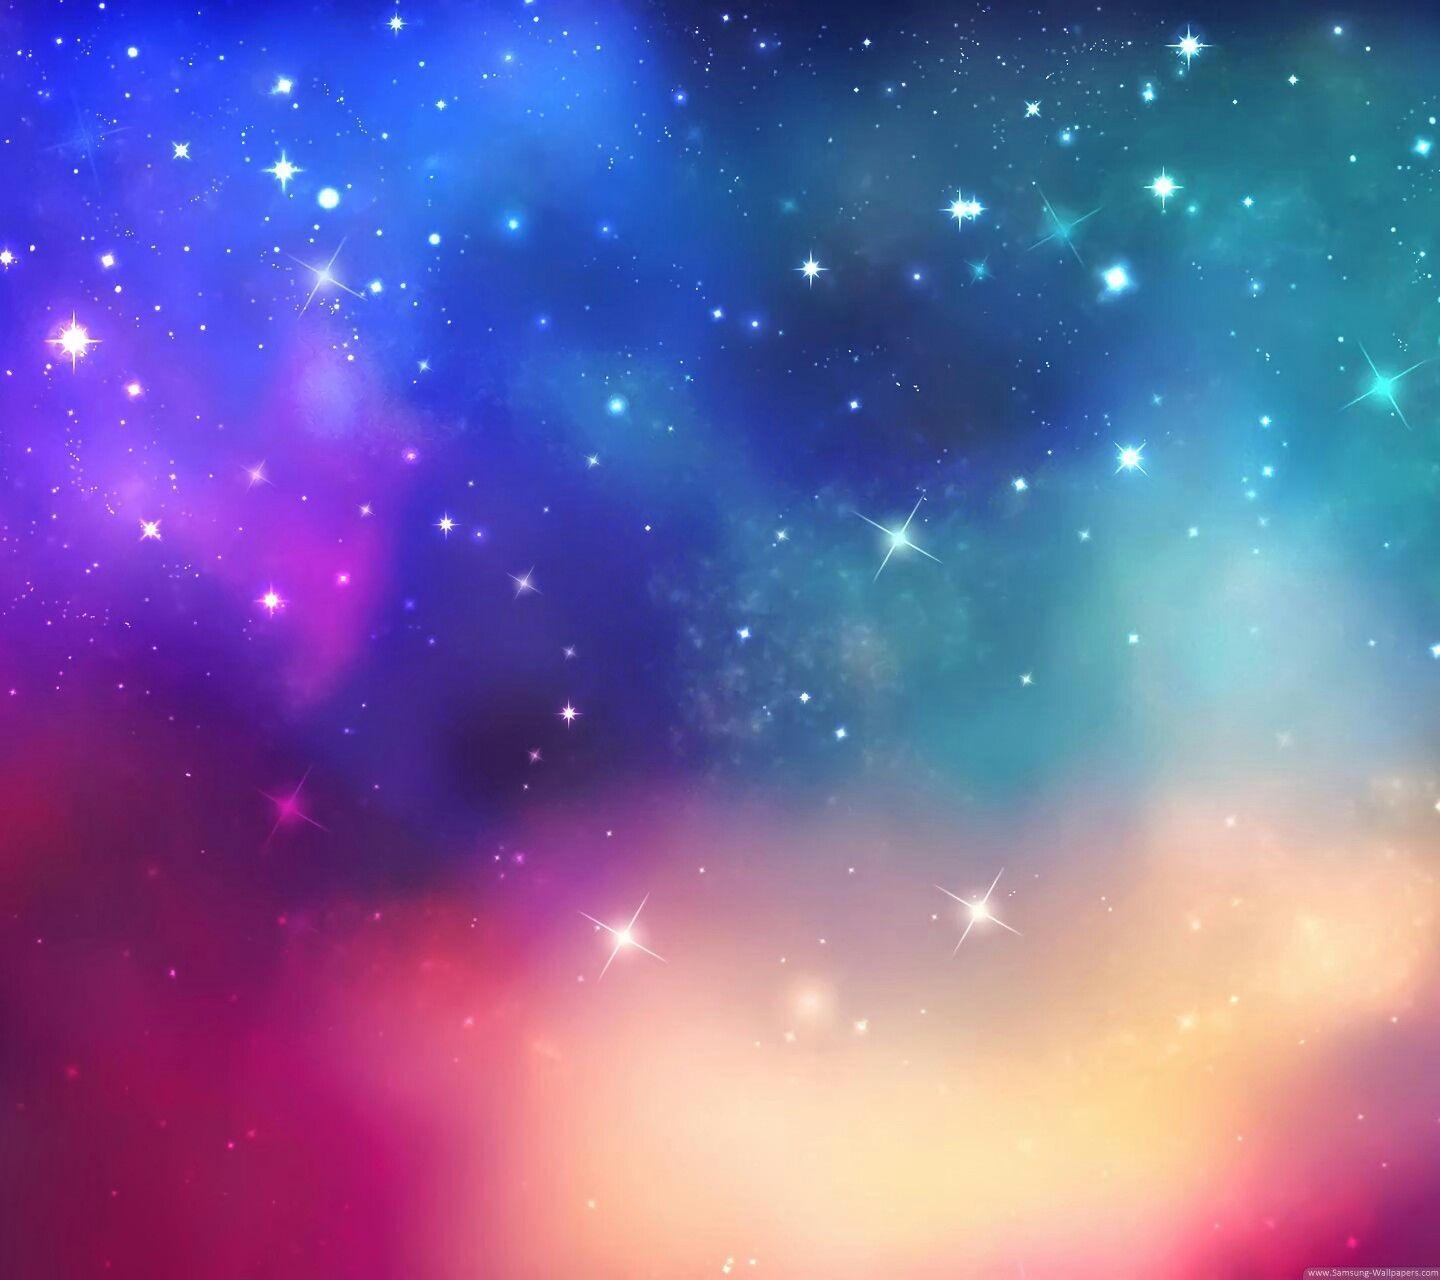 Rainbow Galaxy wallpaper by AbdxllahM  Download on ZEDGE  4134